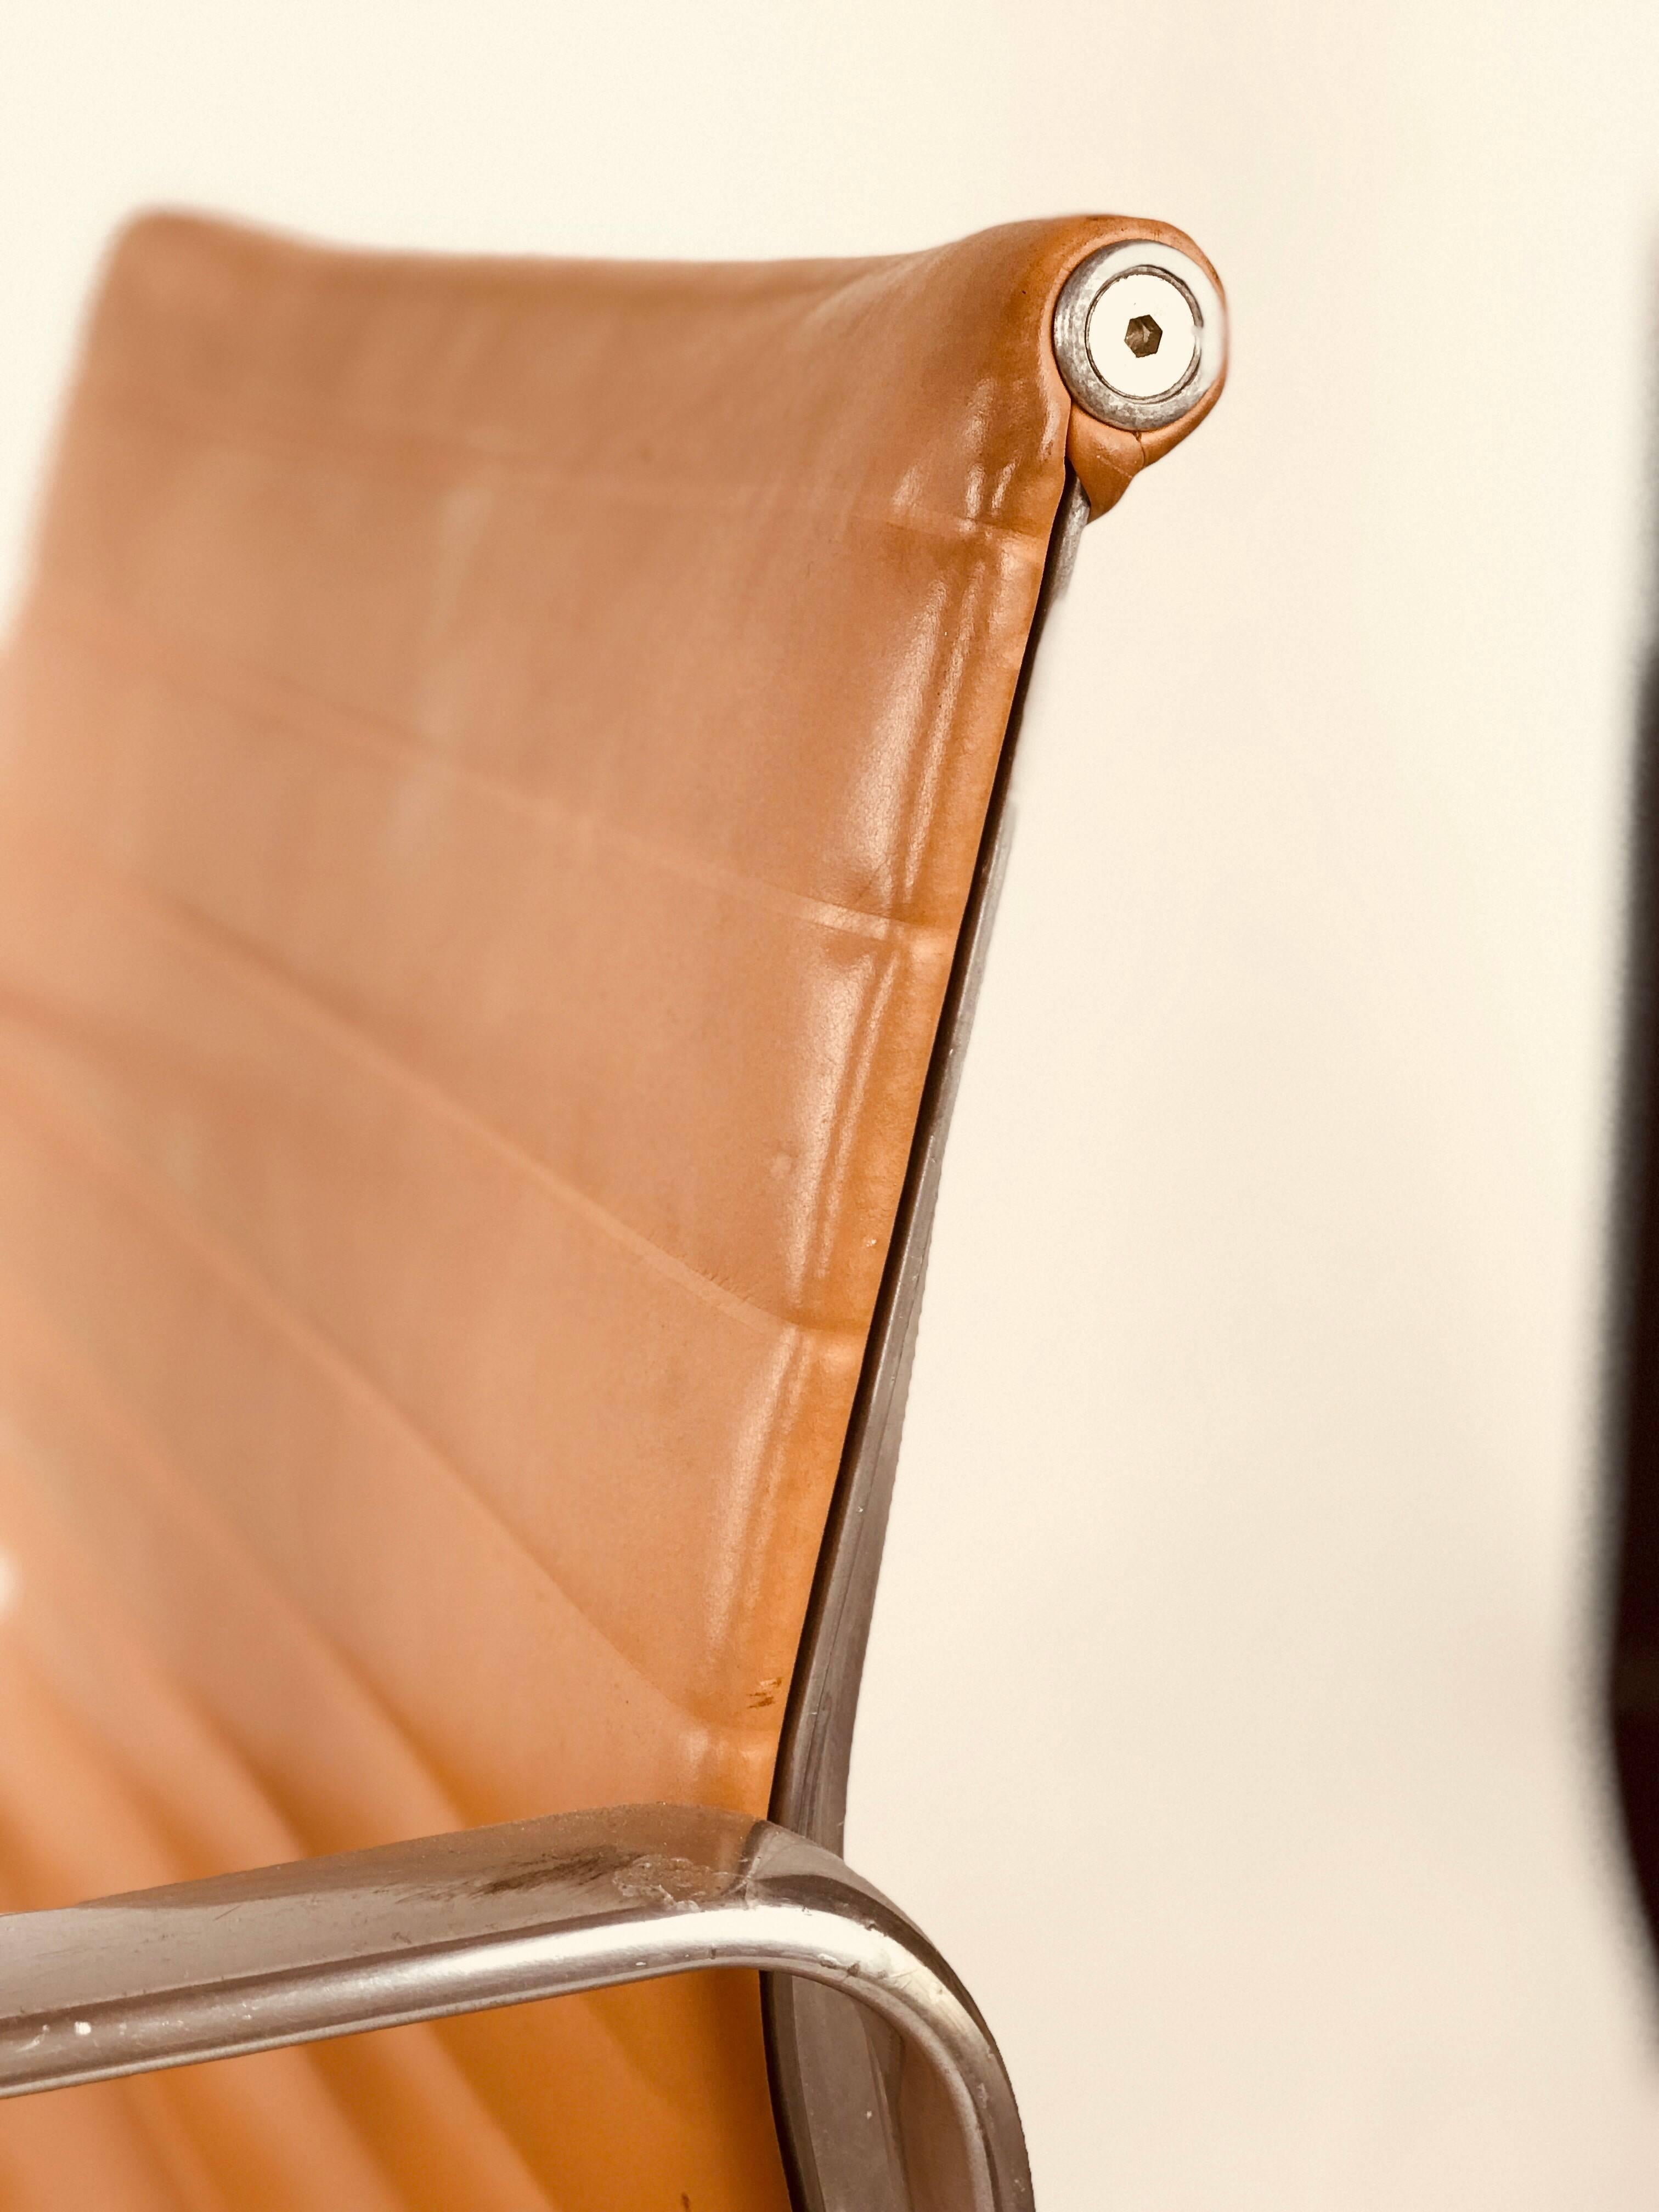 American Eames Management Office Chair for Herman Miller Camel leather